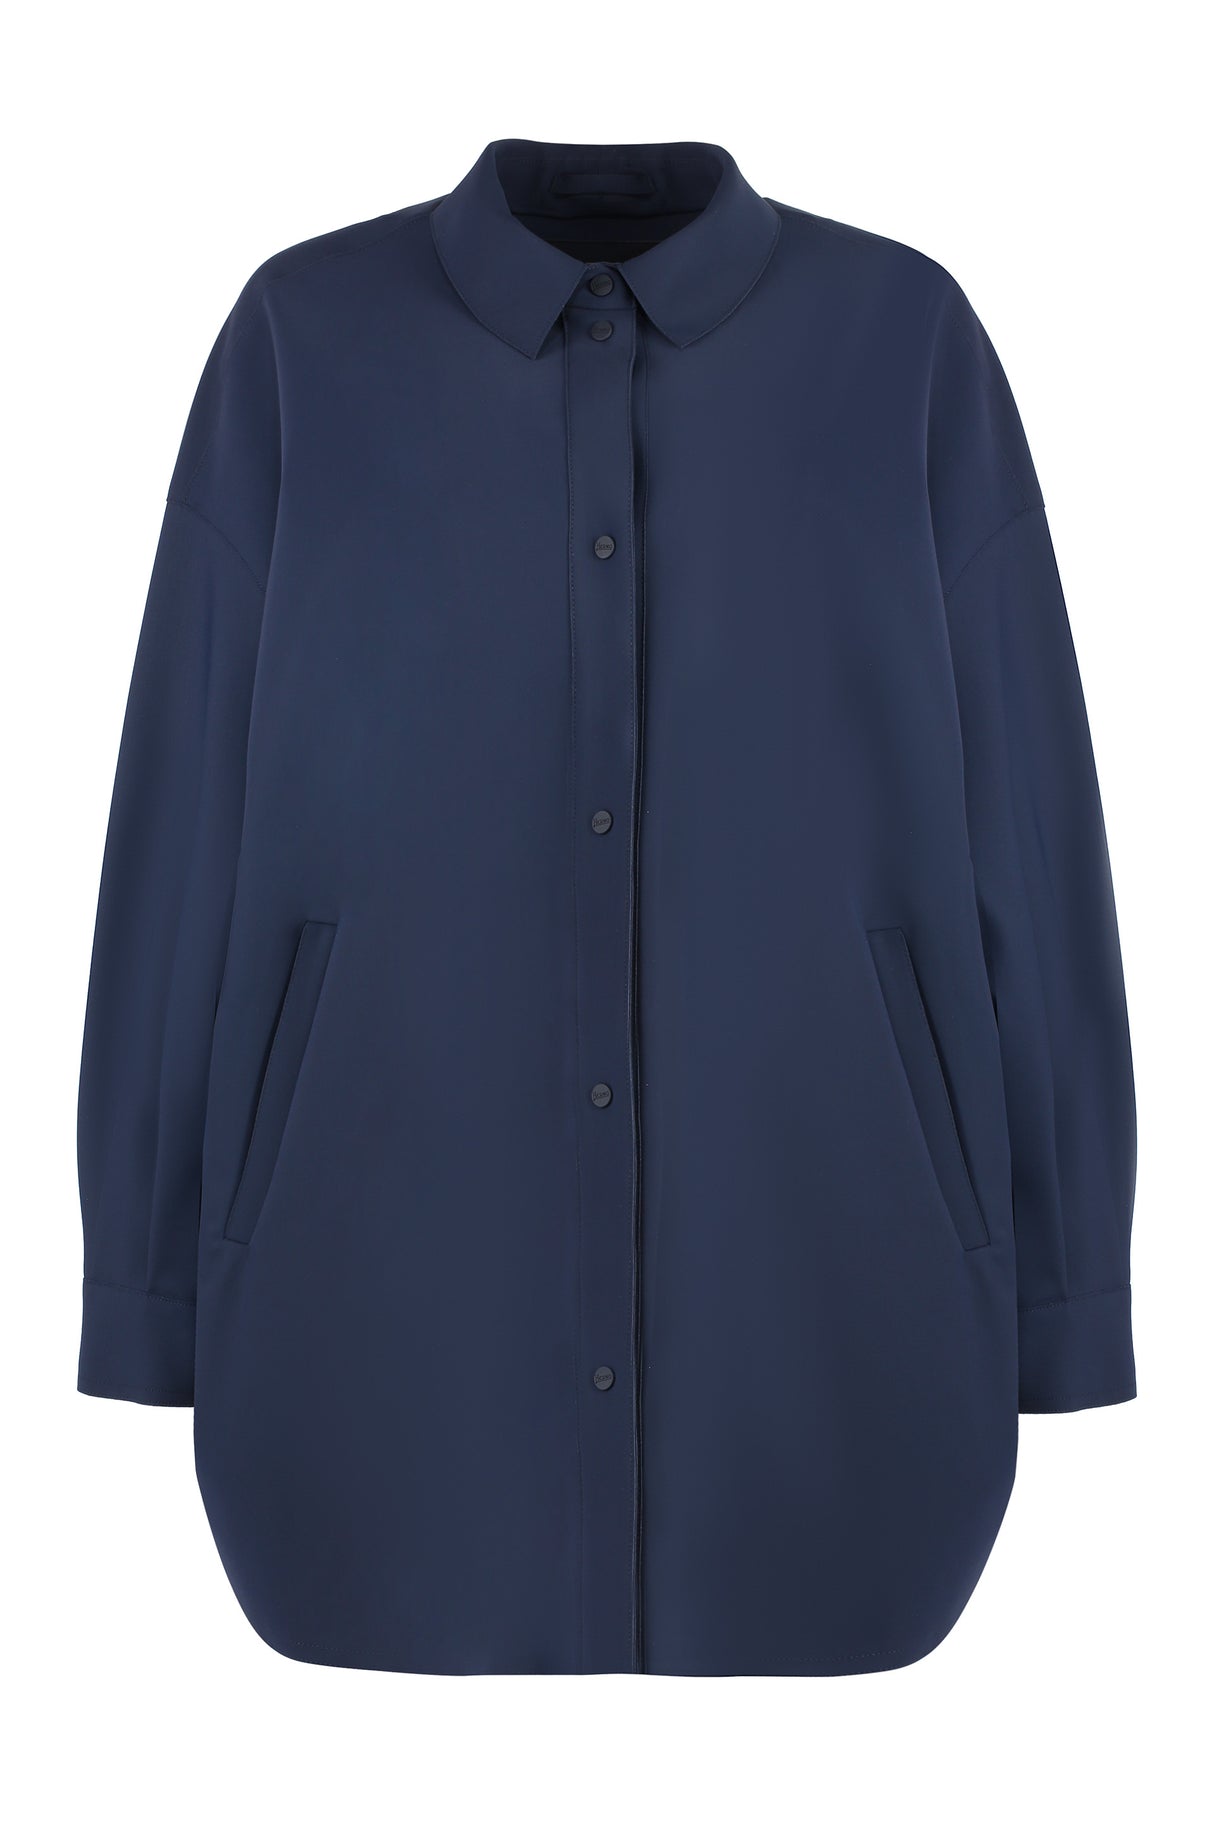 Blue Overshirt with Rounded Hem and Side Slits